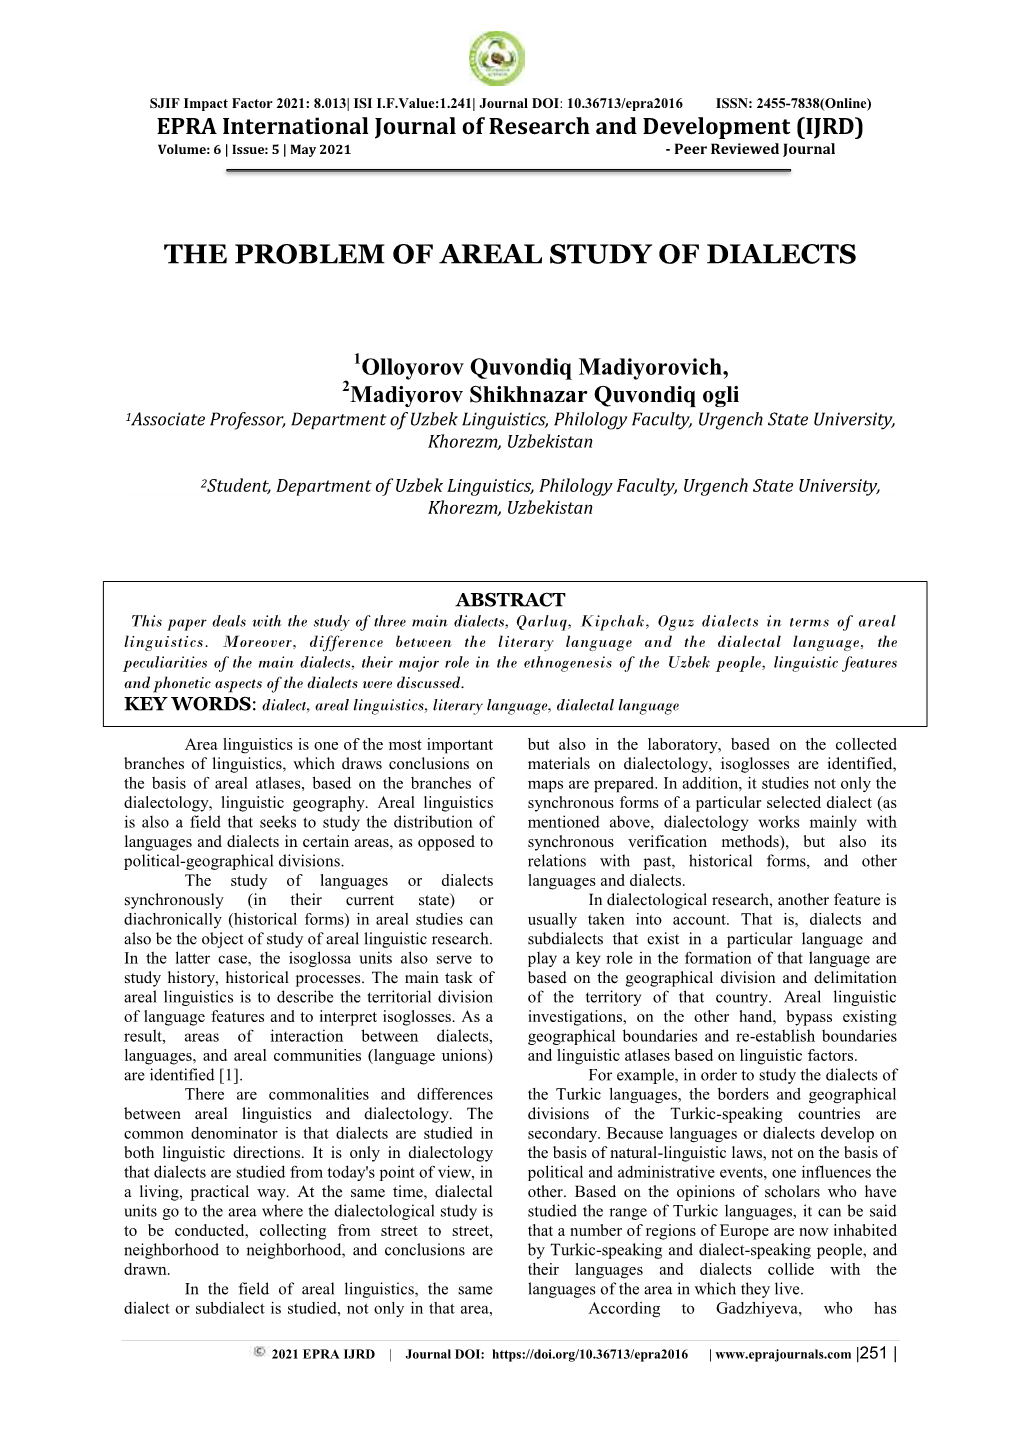 The Problem of Areal Study of Dialects